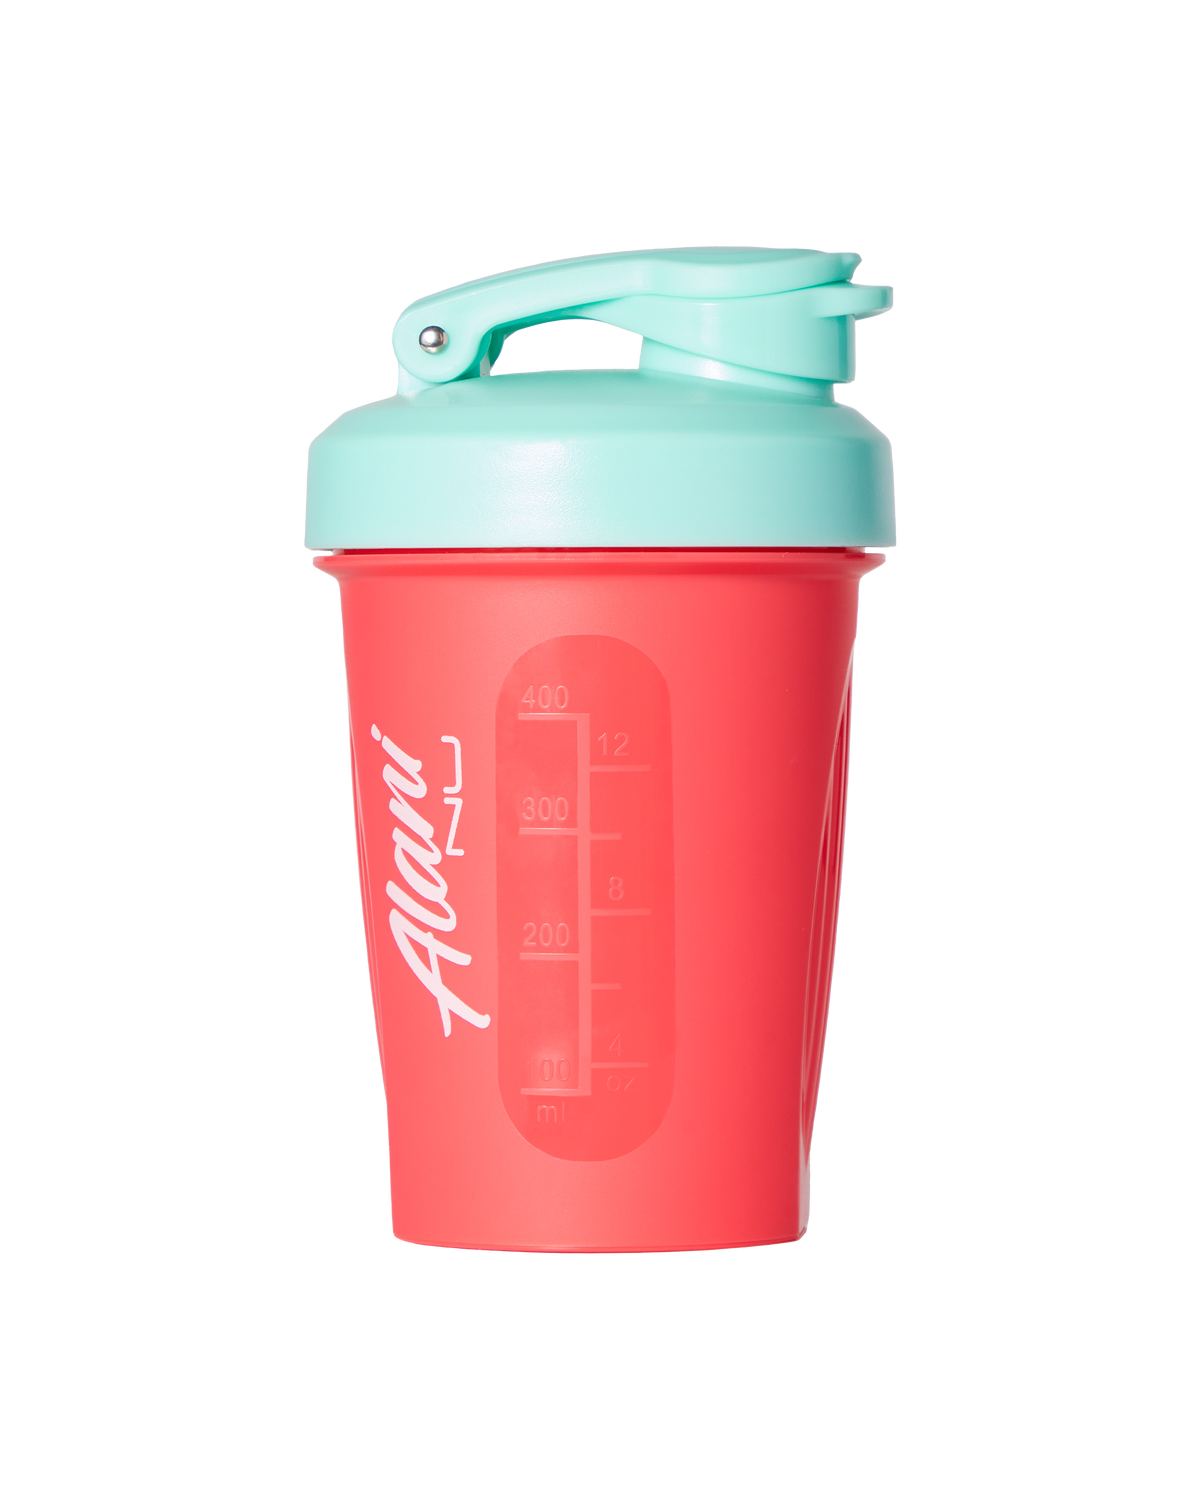 An Alani Nu 12oz Shaker in Electric Smiles with a blue lid and handle.